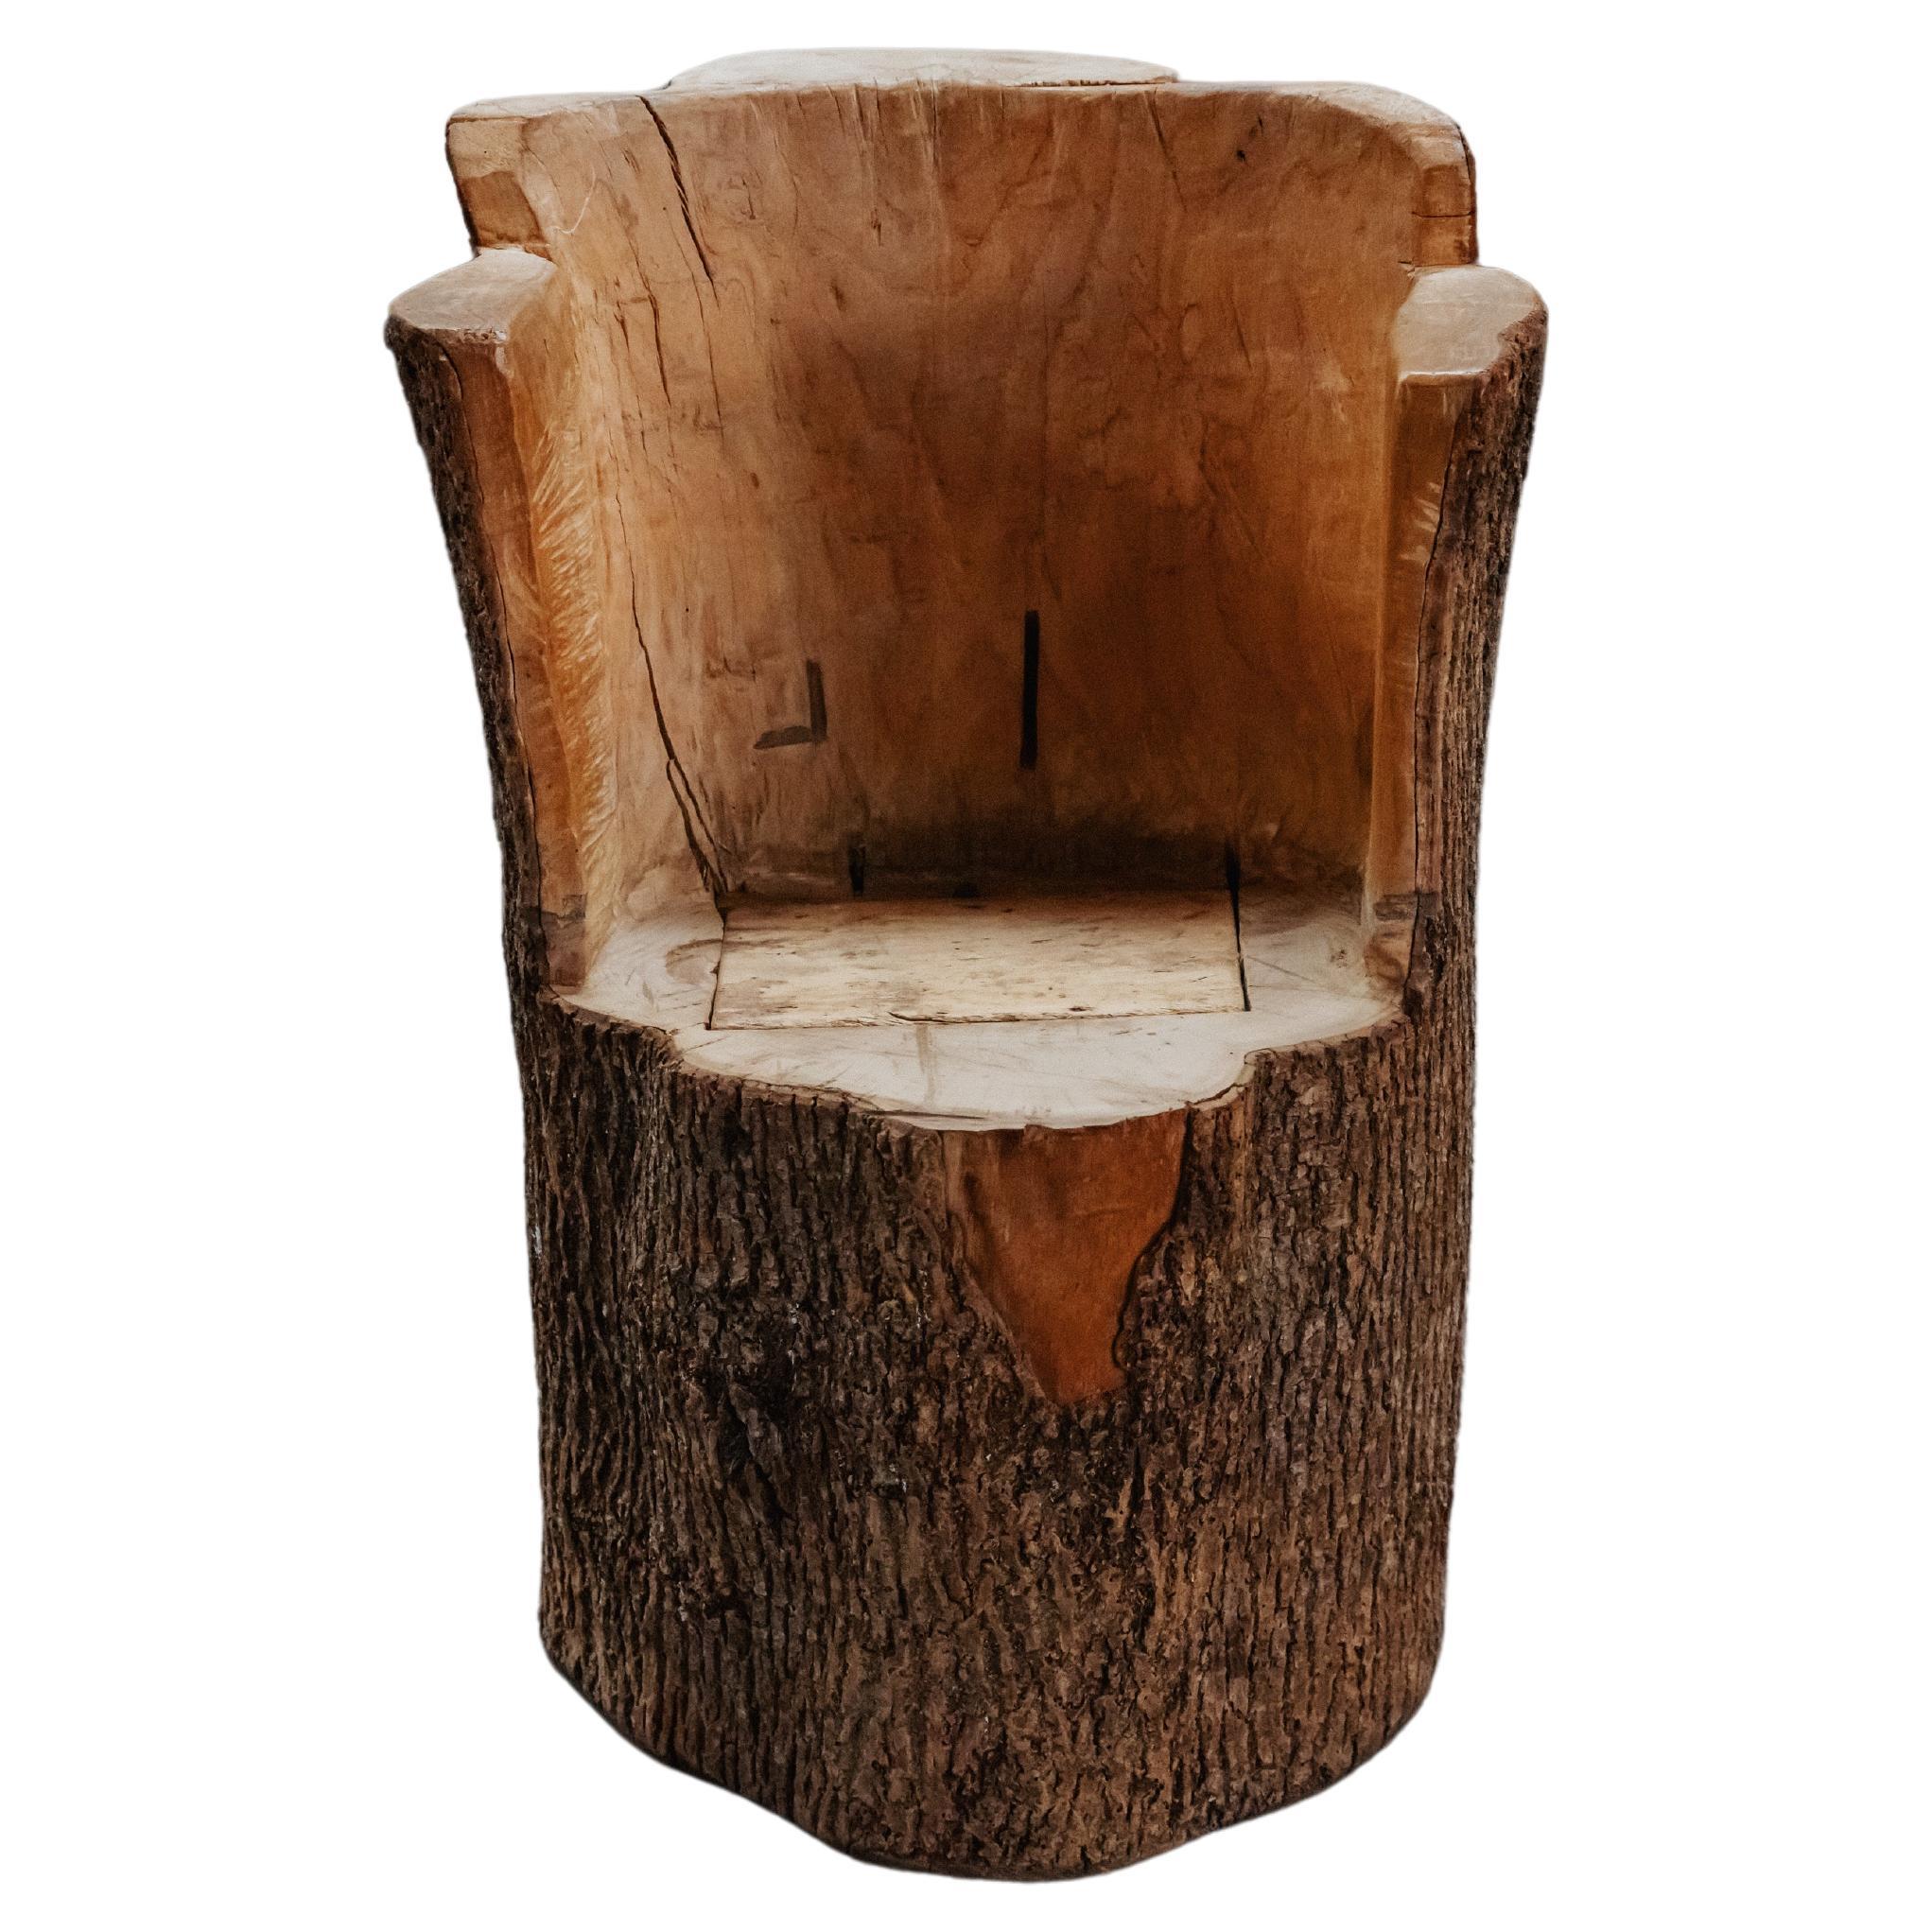 Early Kubb Stool Chair From France, Circa 1920 For Sale